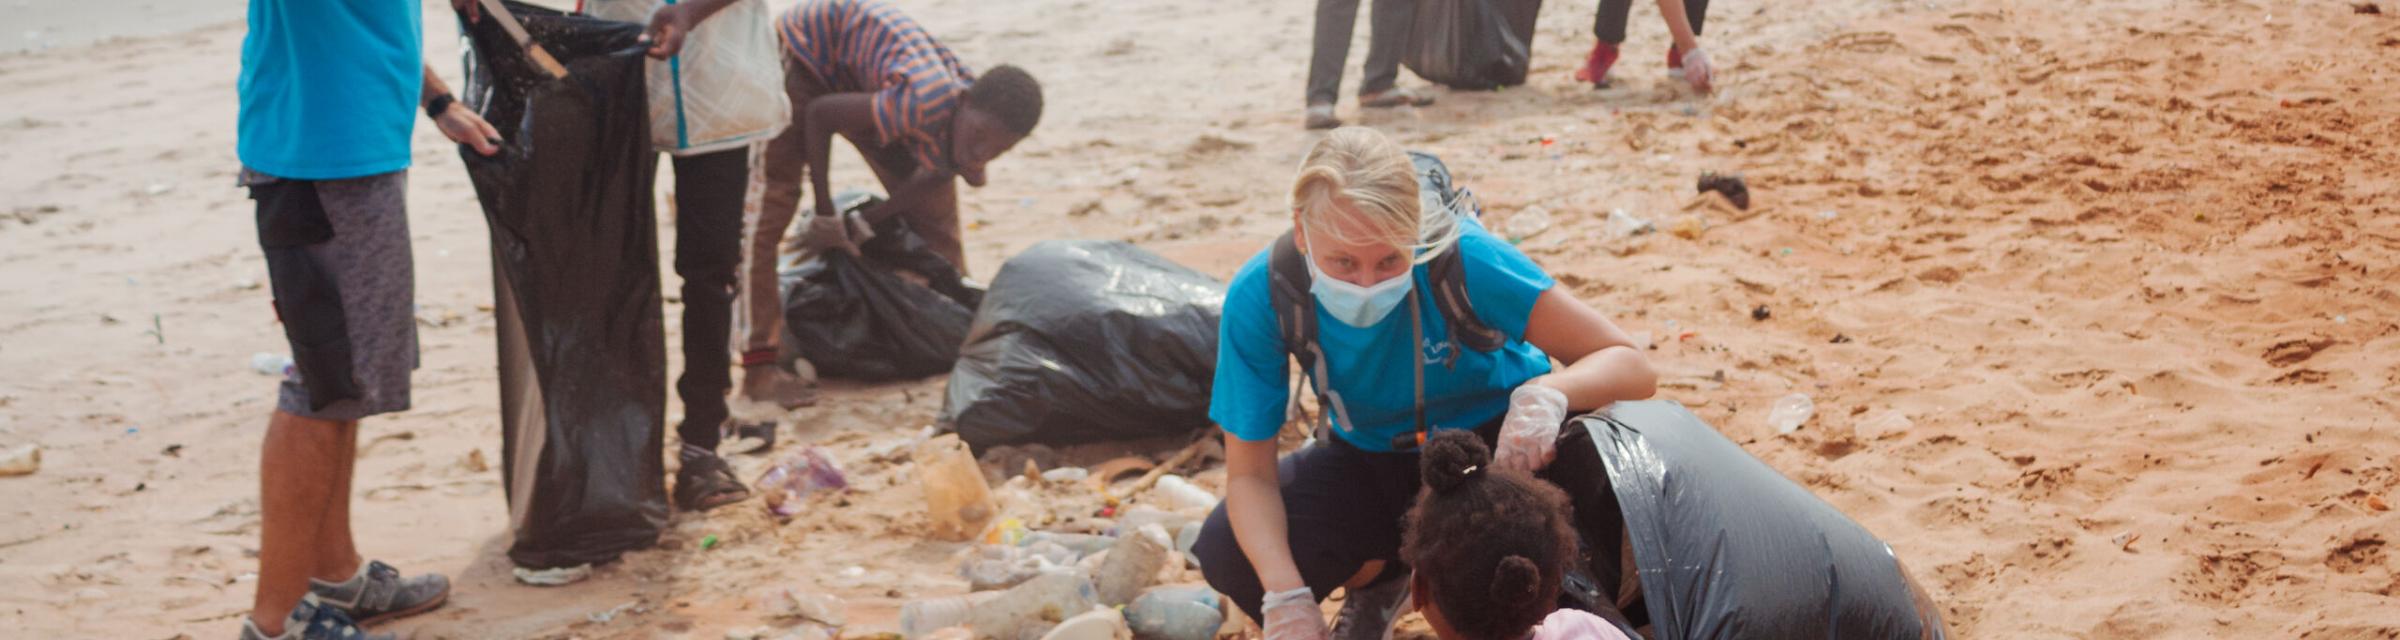 Tema, Ghana :: Crewmembers and local people work together to collect trash on the beach.